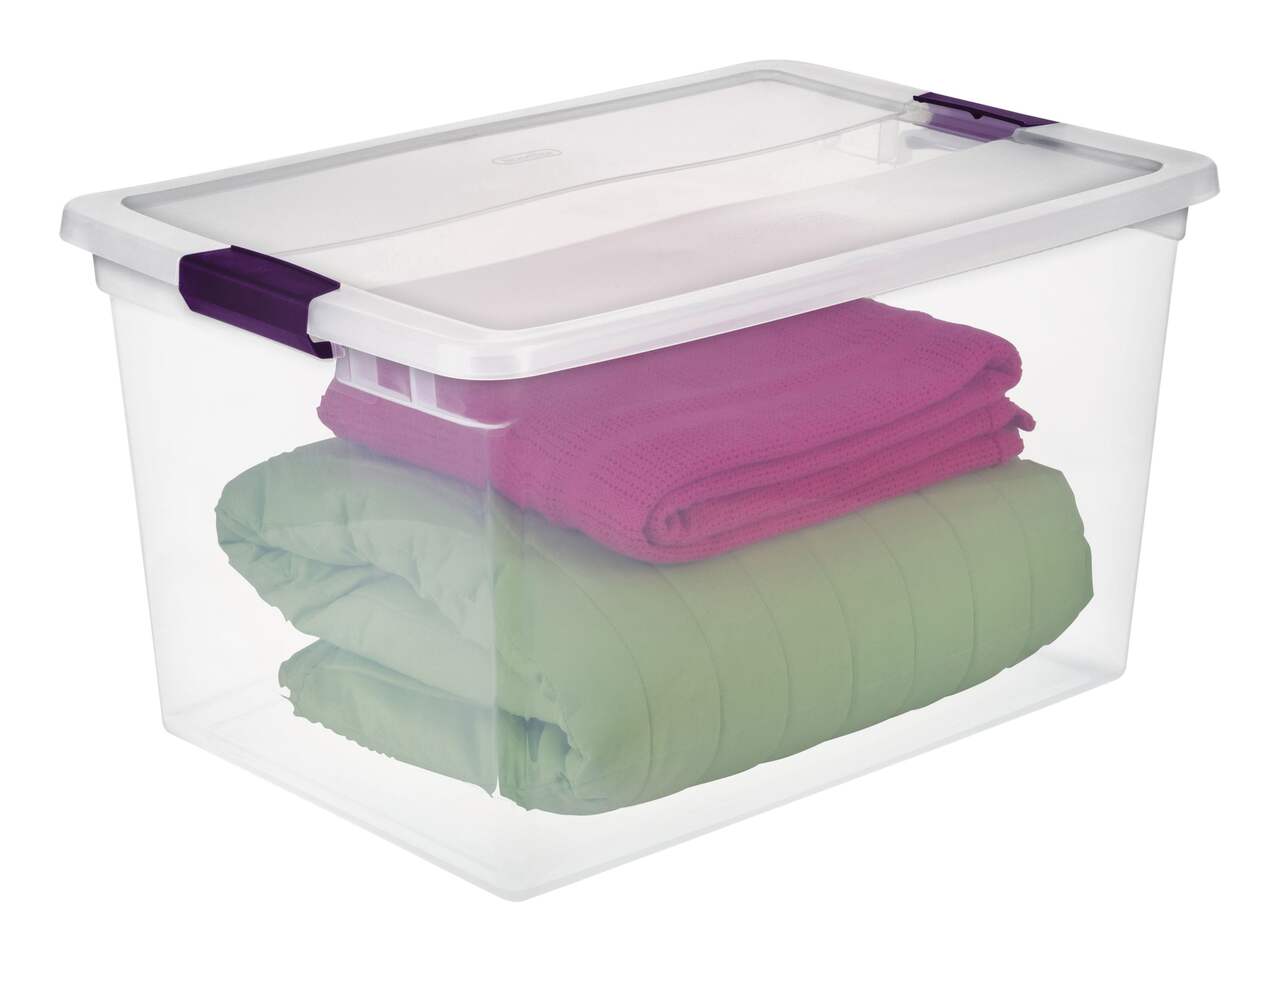 https://media-www.canadiantire.ca/product/living/home-organization/storage-solutions/1426025/sterilite-clearview-tote-with-latch-62l-91384412-aaef-4b05-b9a4-6dba5980bbab-jpgrendition.jpg?imdensity=1&imwidth=640&impolicy=mZoom